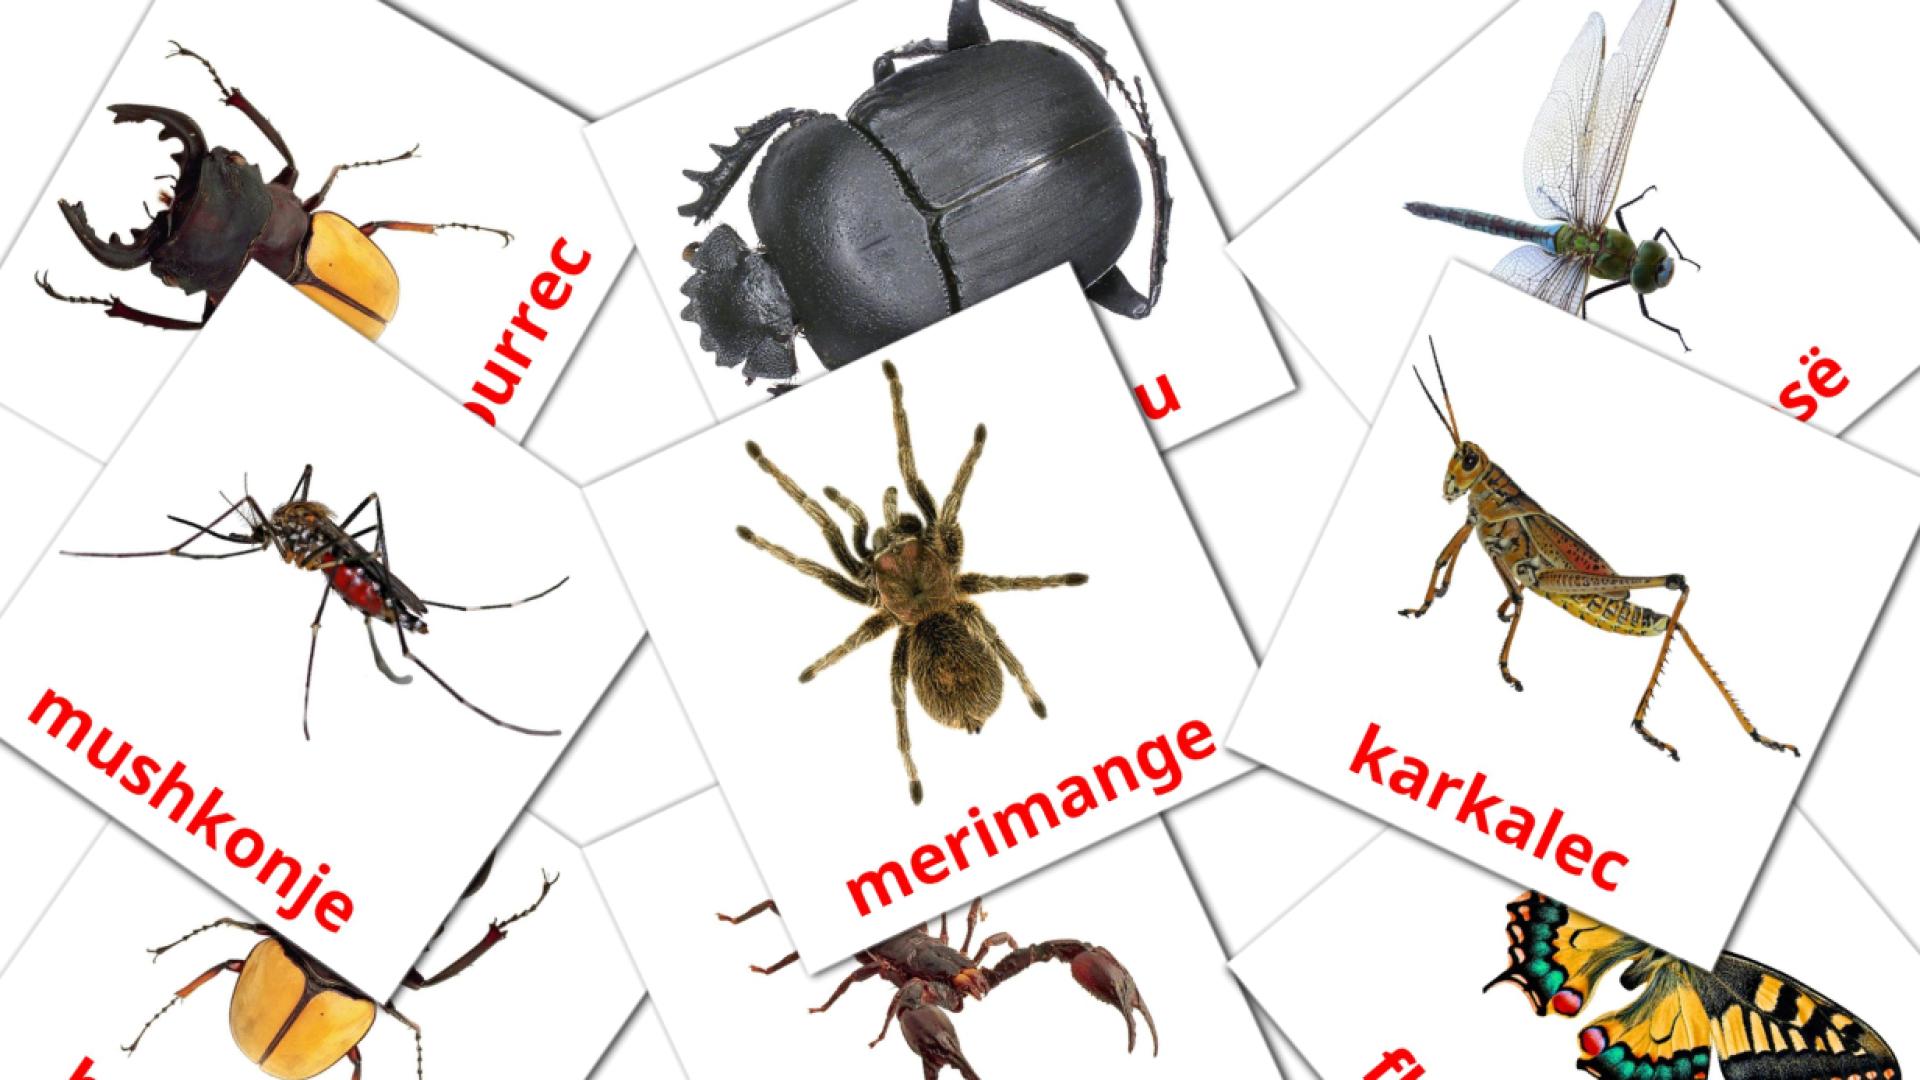 Insects - albanian vocabulary cards